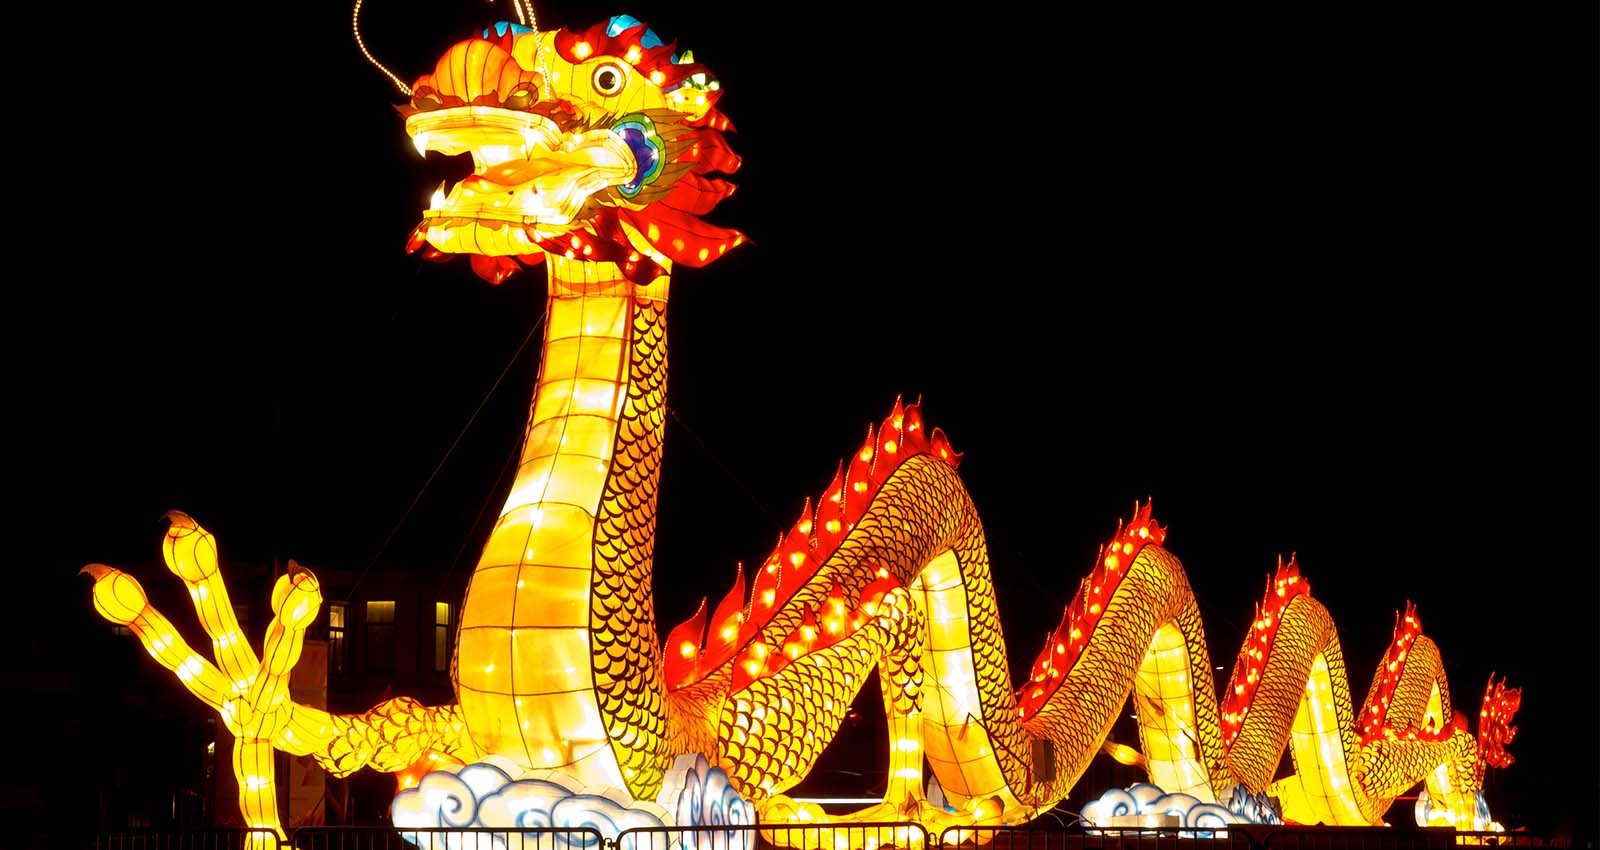 A large illuminated gold and red dragon on black background